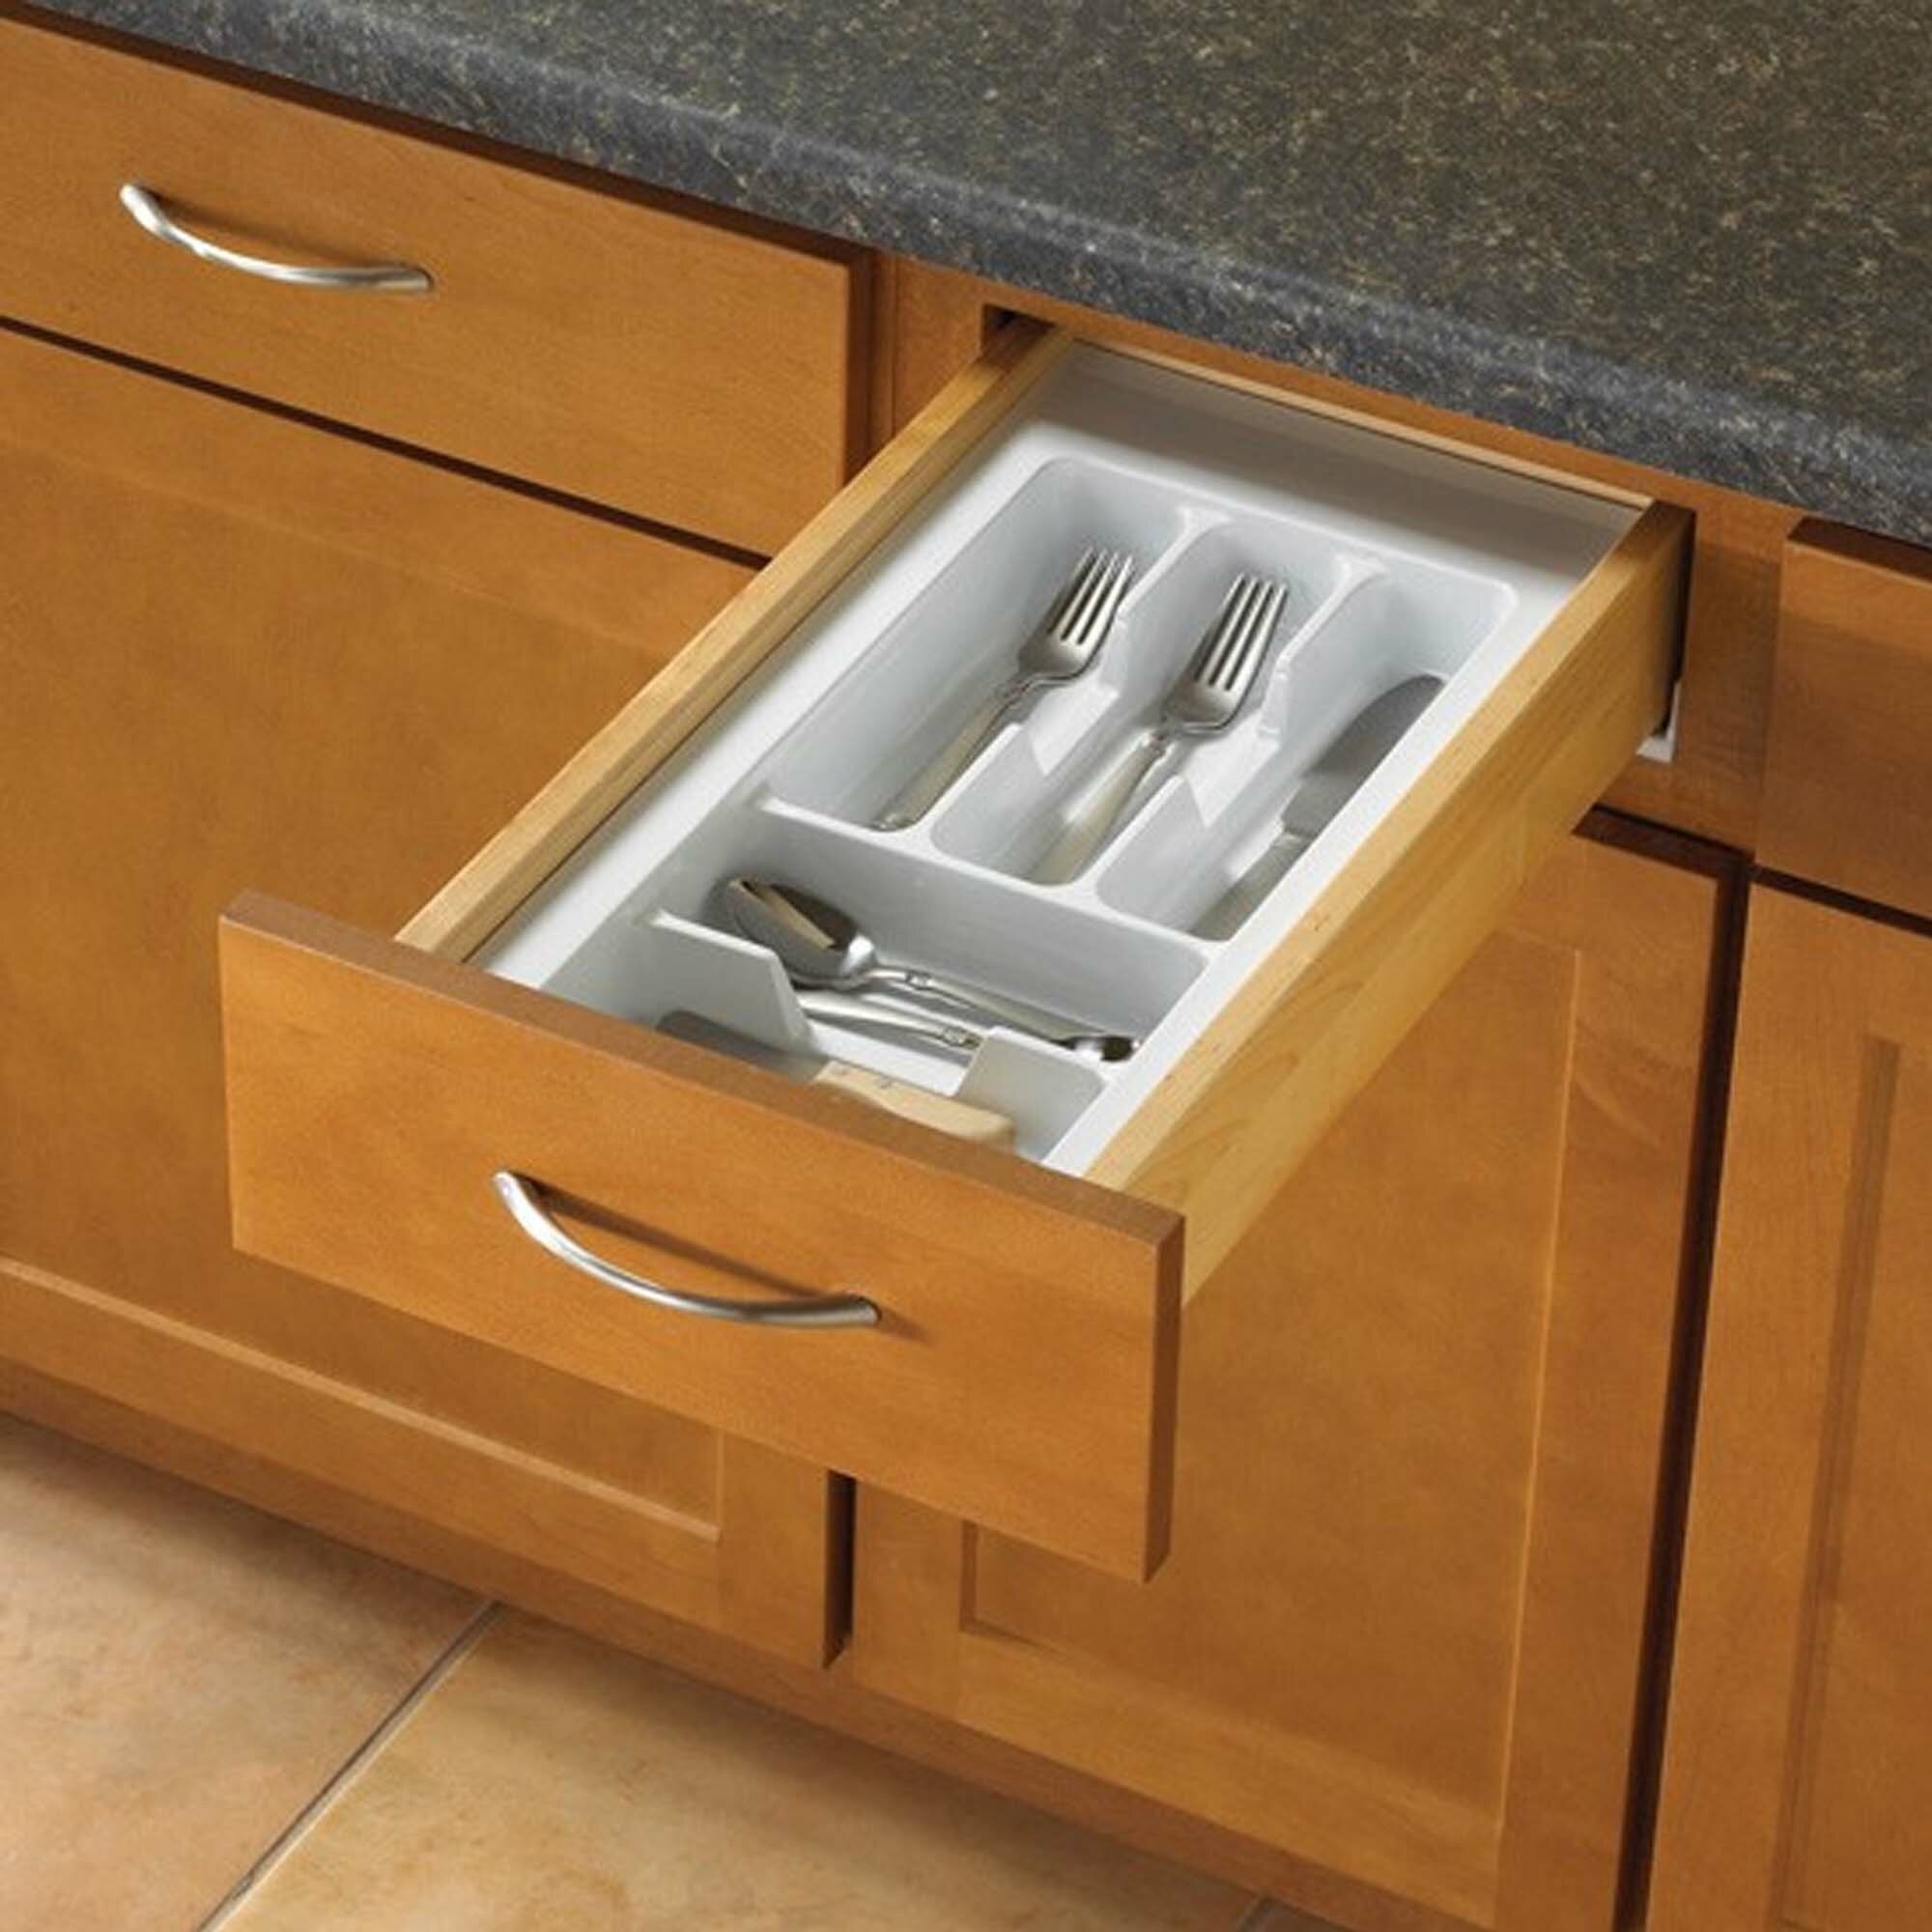 13.5 in. W x 21.5 in. D Wire Pull-Out Pantry Drawer Cabinet Organizer